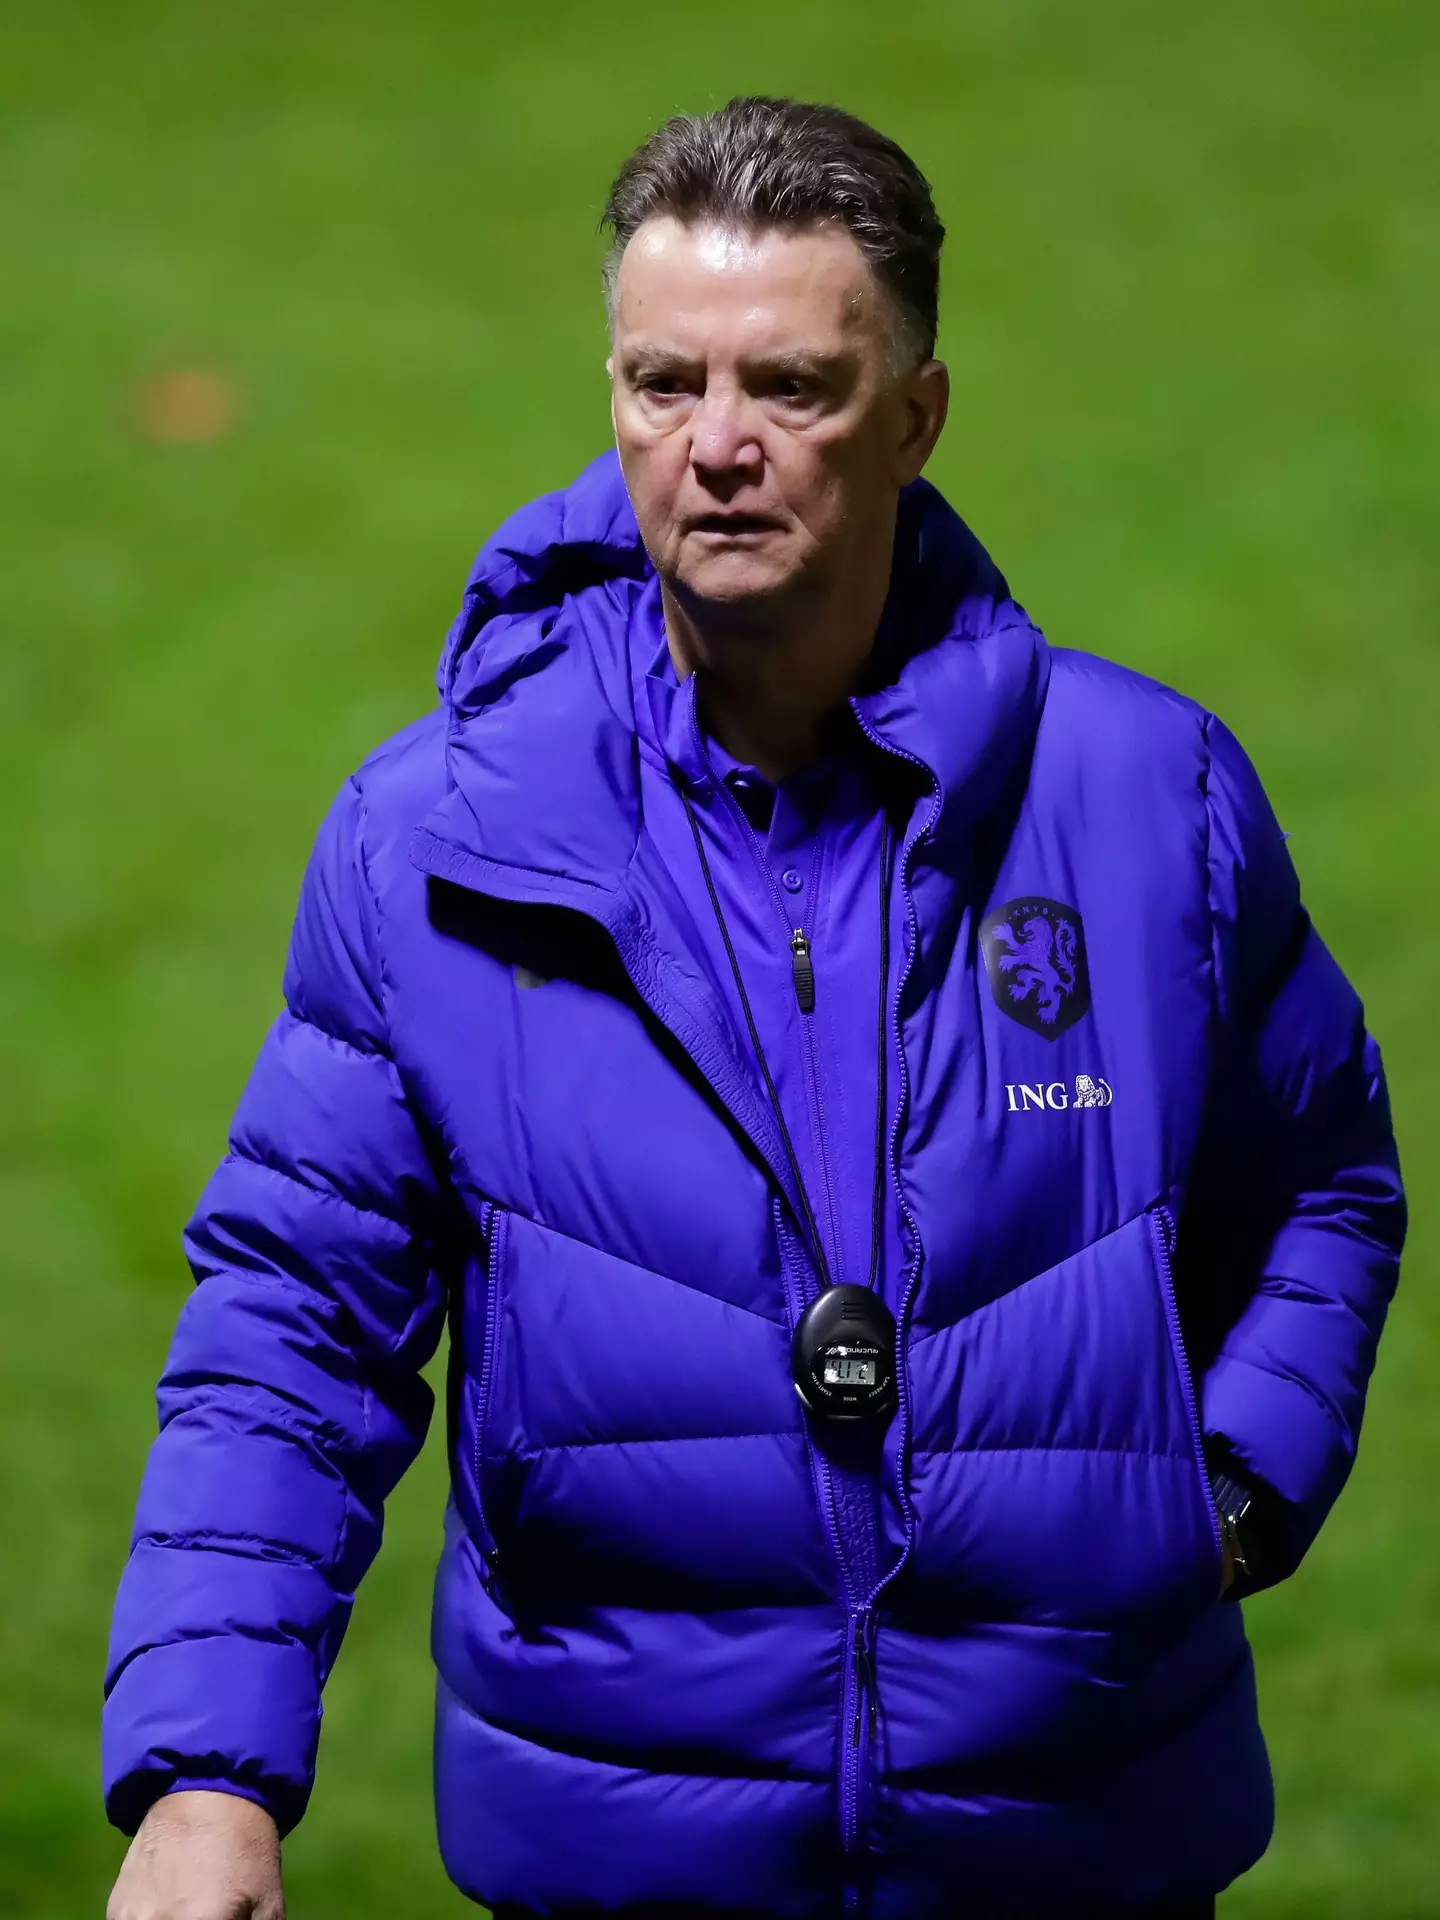 Louis van Gaal is currently in charge of the Dutch national team (Image: Alamy)